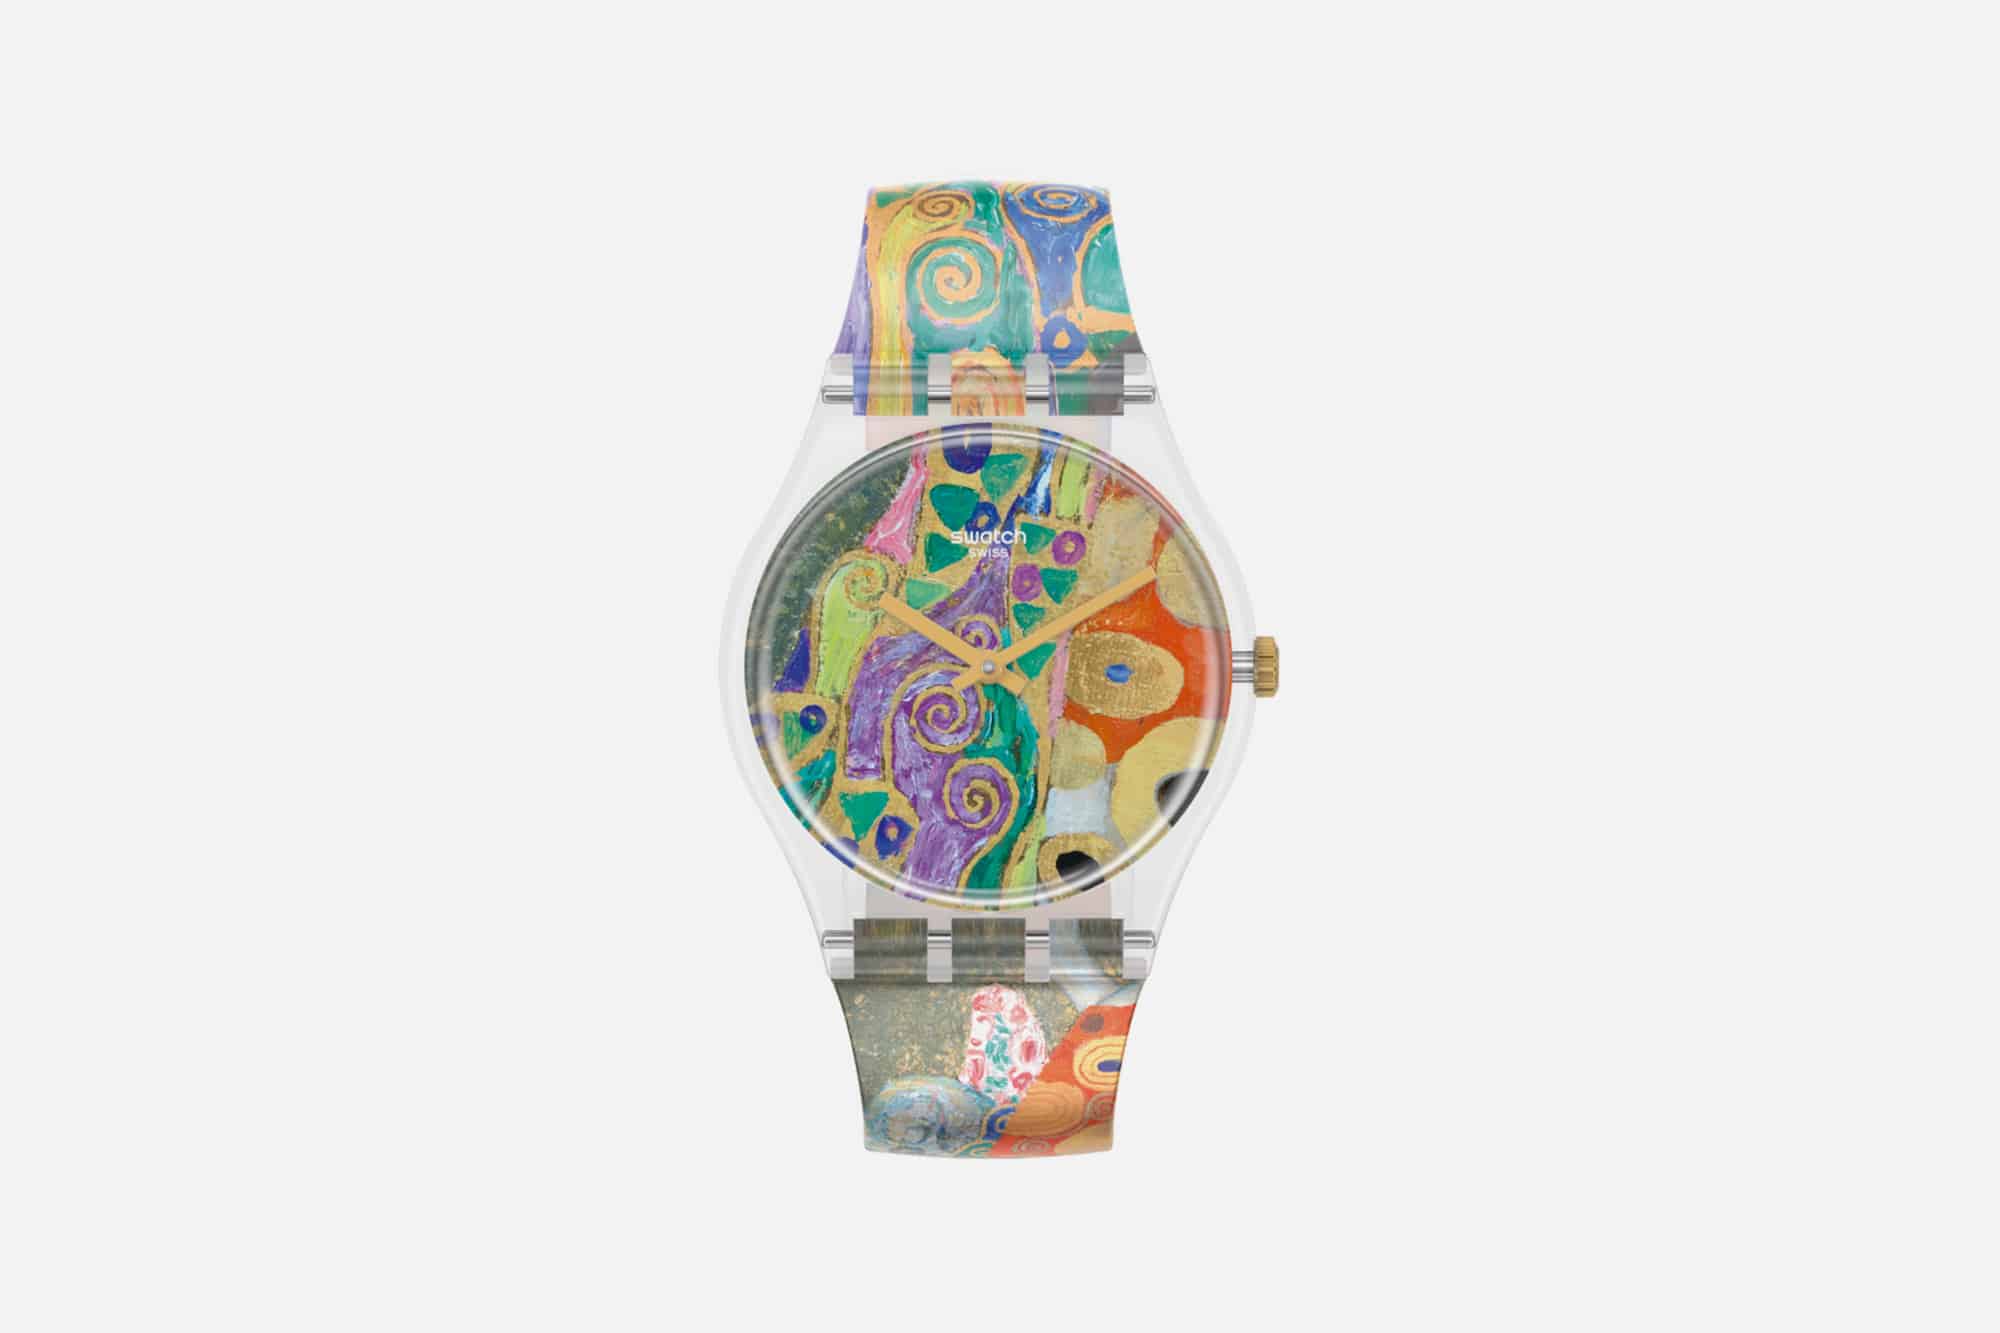 Swatch Partners with MoMA on a New Collection Inspired by Great Modern Art Worn